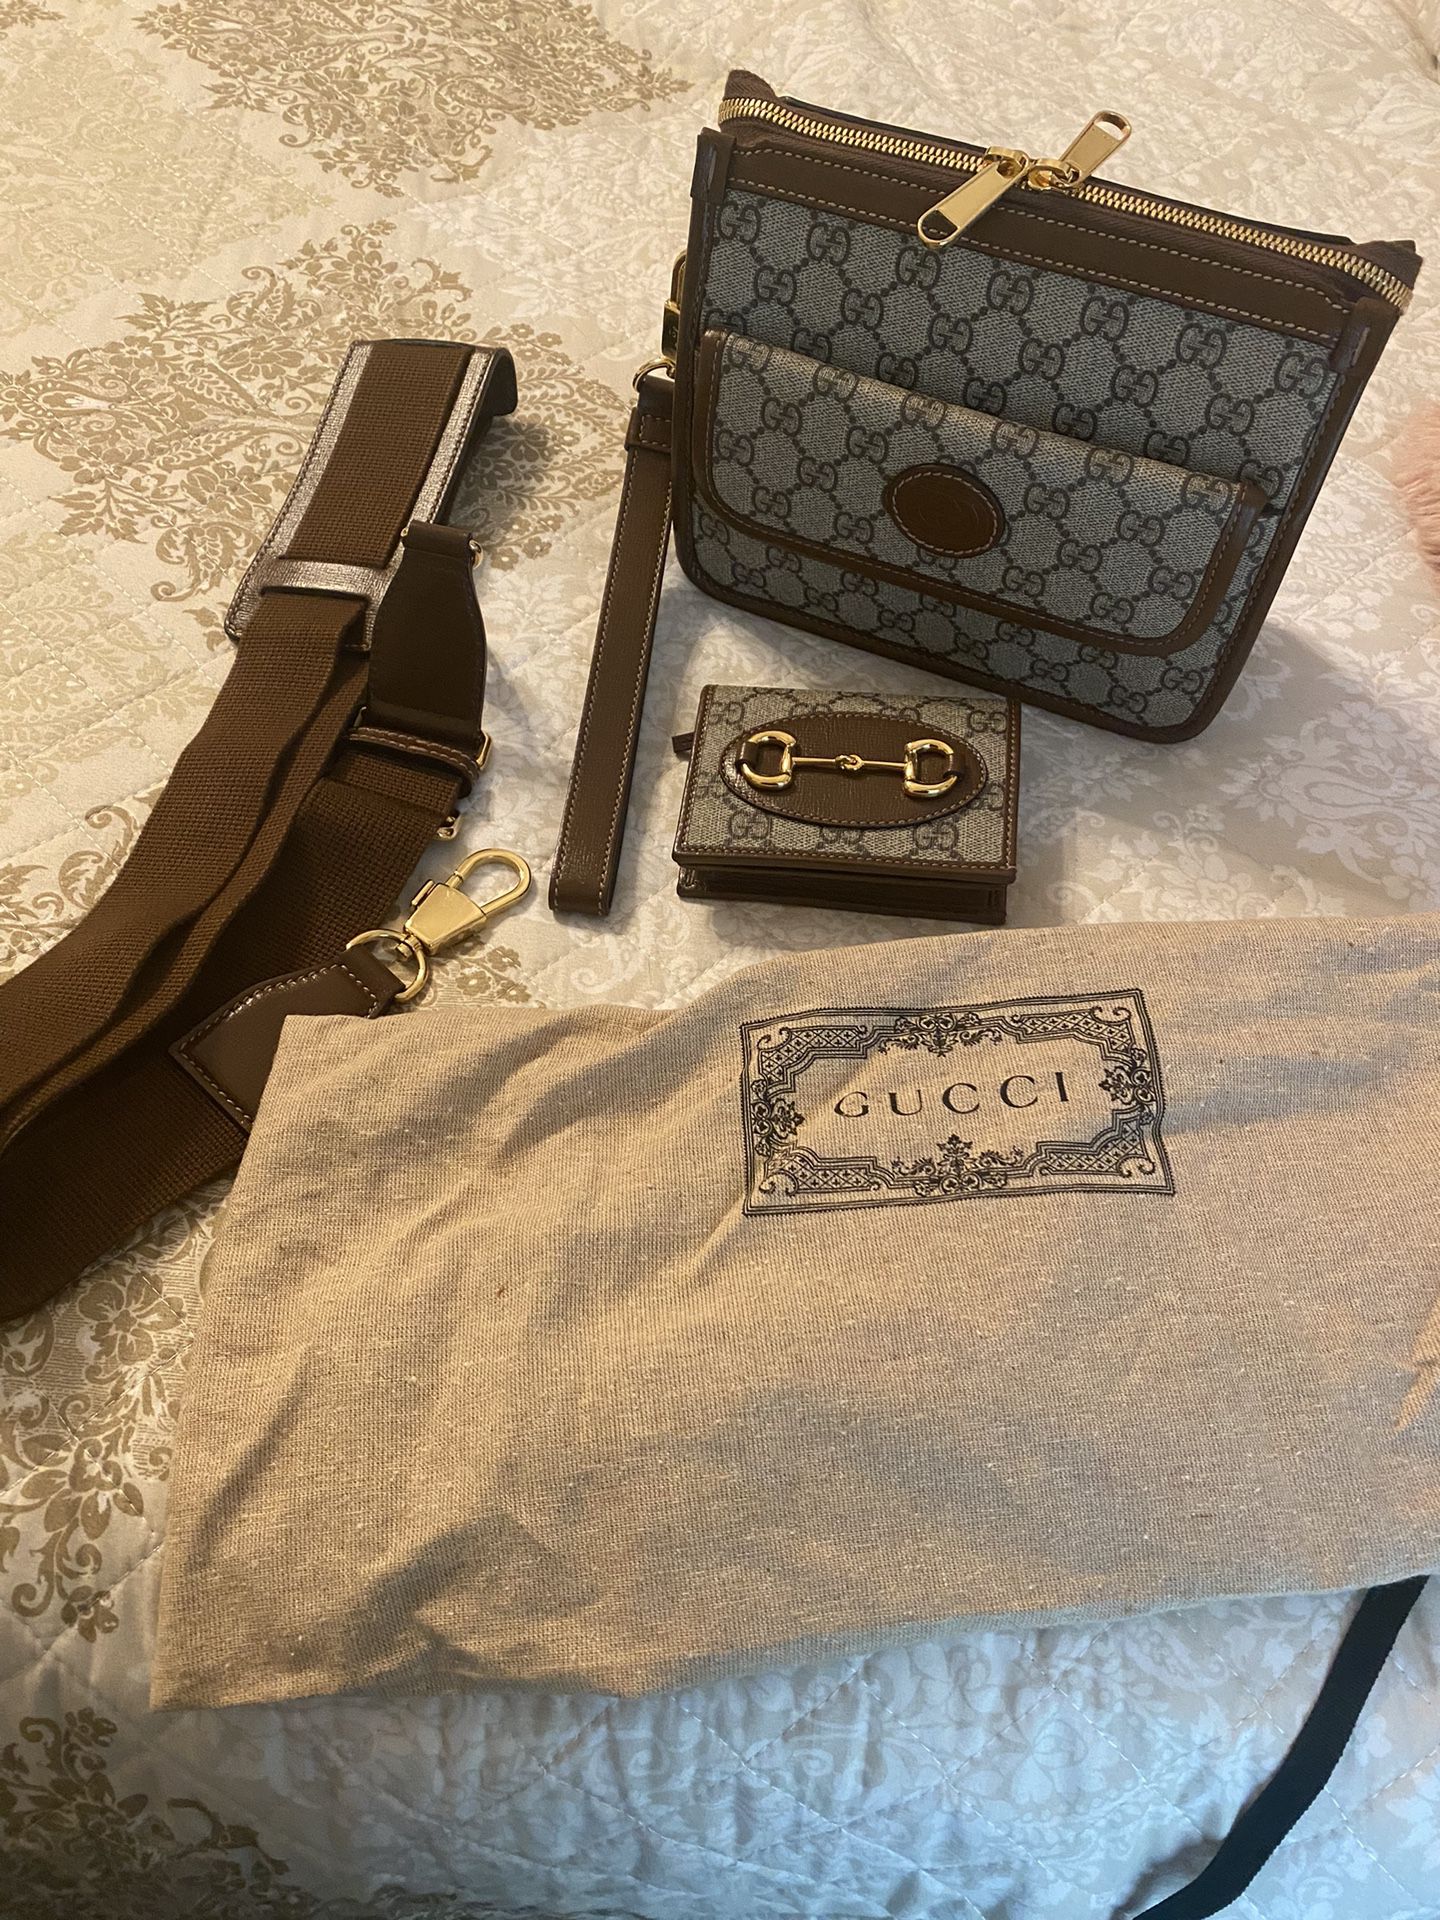 GUCCI Messenger w/matching Wallet (NEW CONDITION)LEGITIMATE 